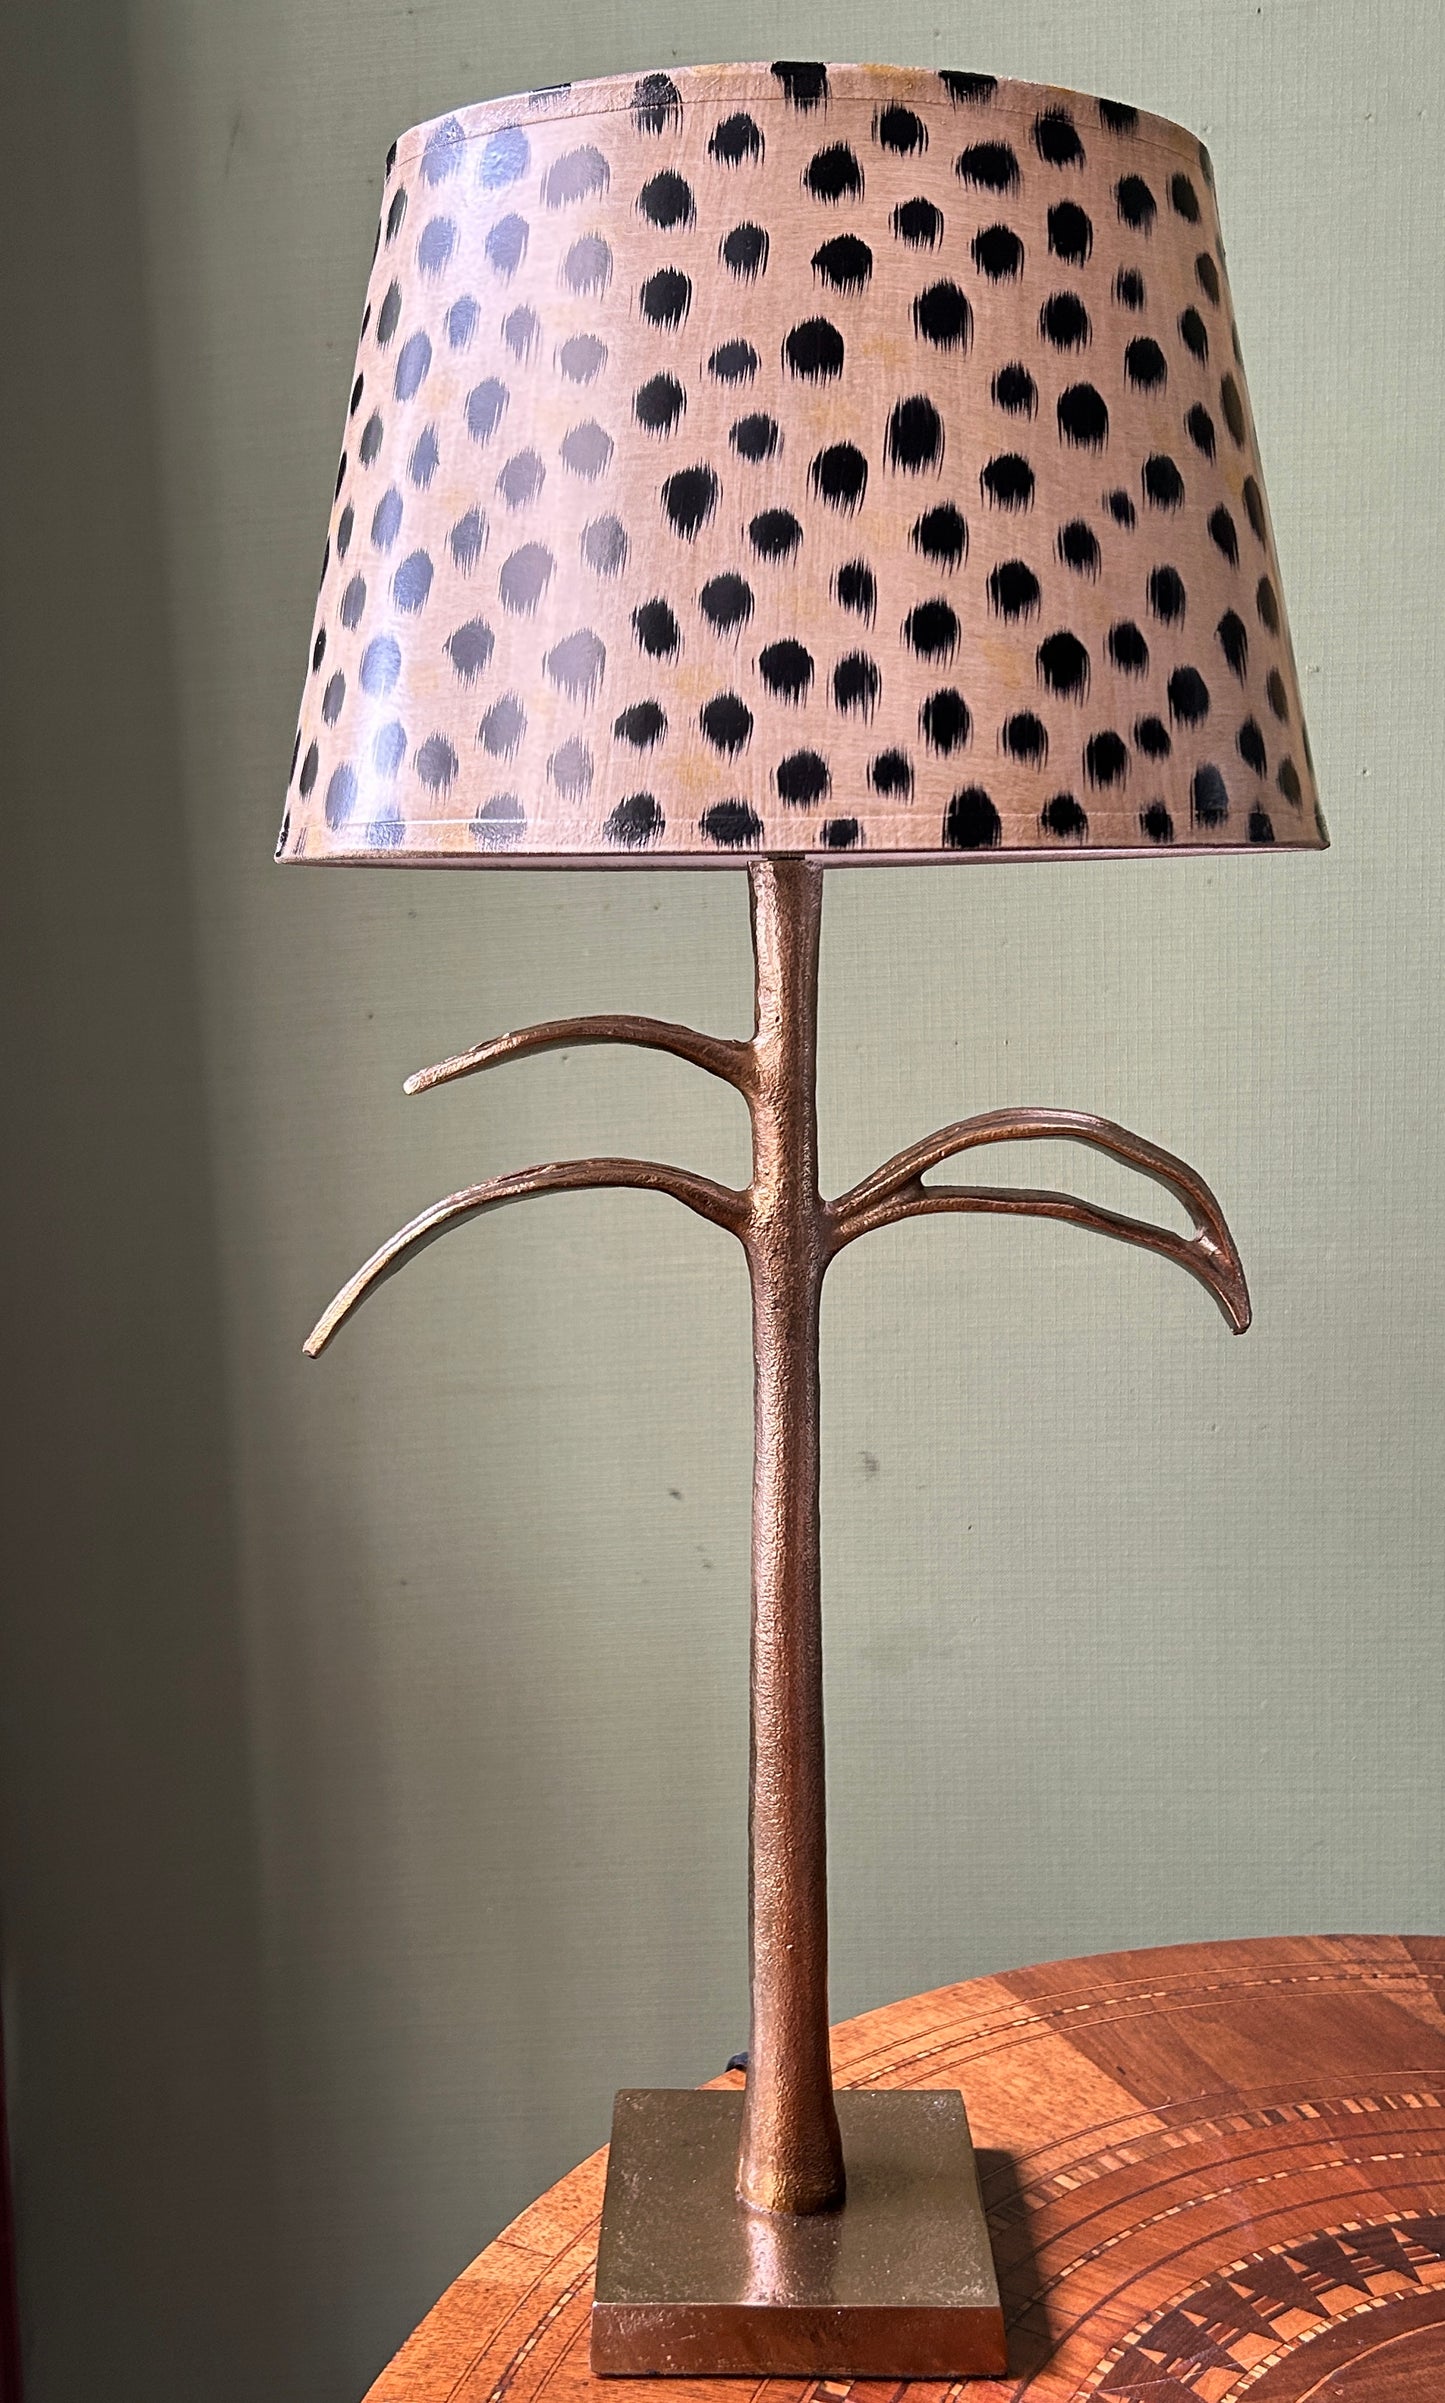 Leaf lamp with leo lampshade